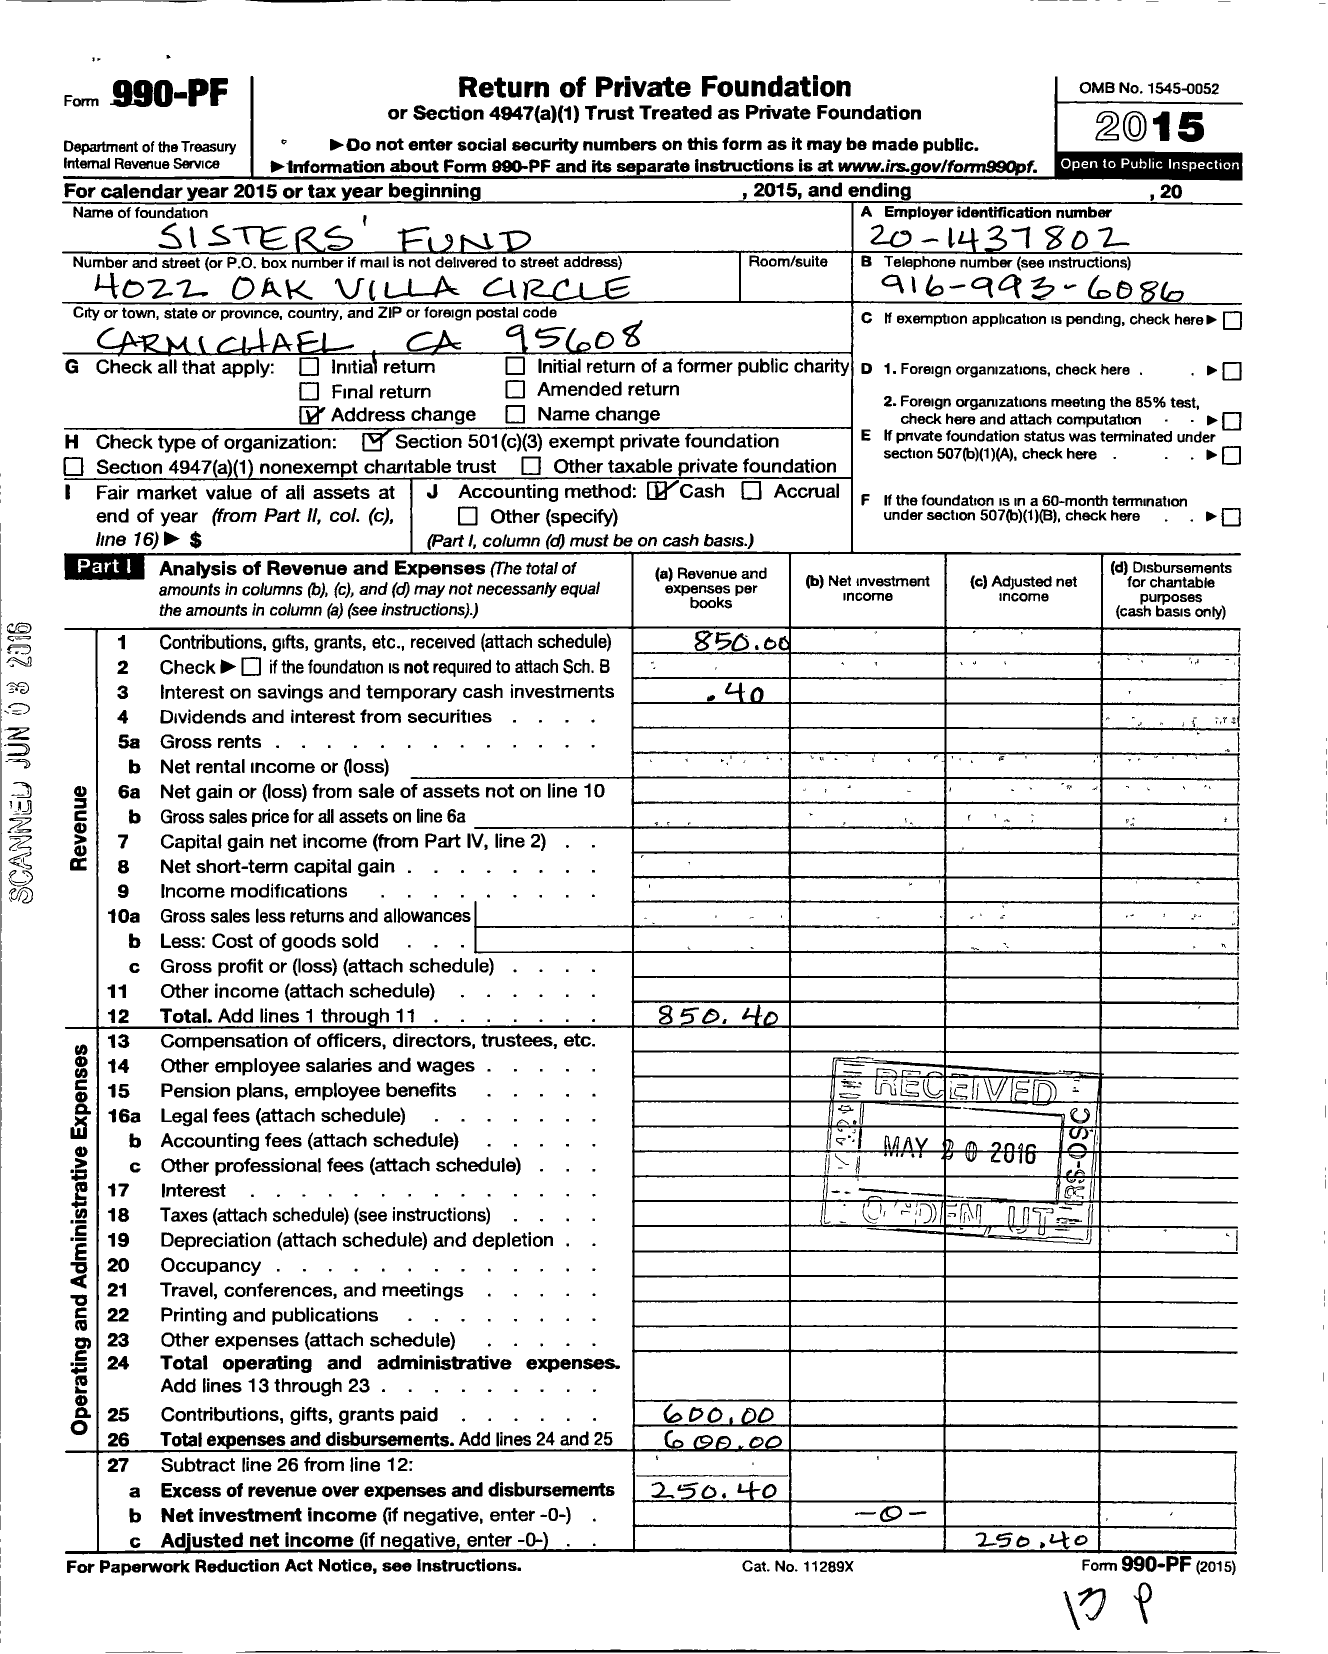 Image of first page of 2015 Form 990PF for Sisters Fund